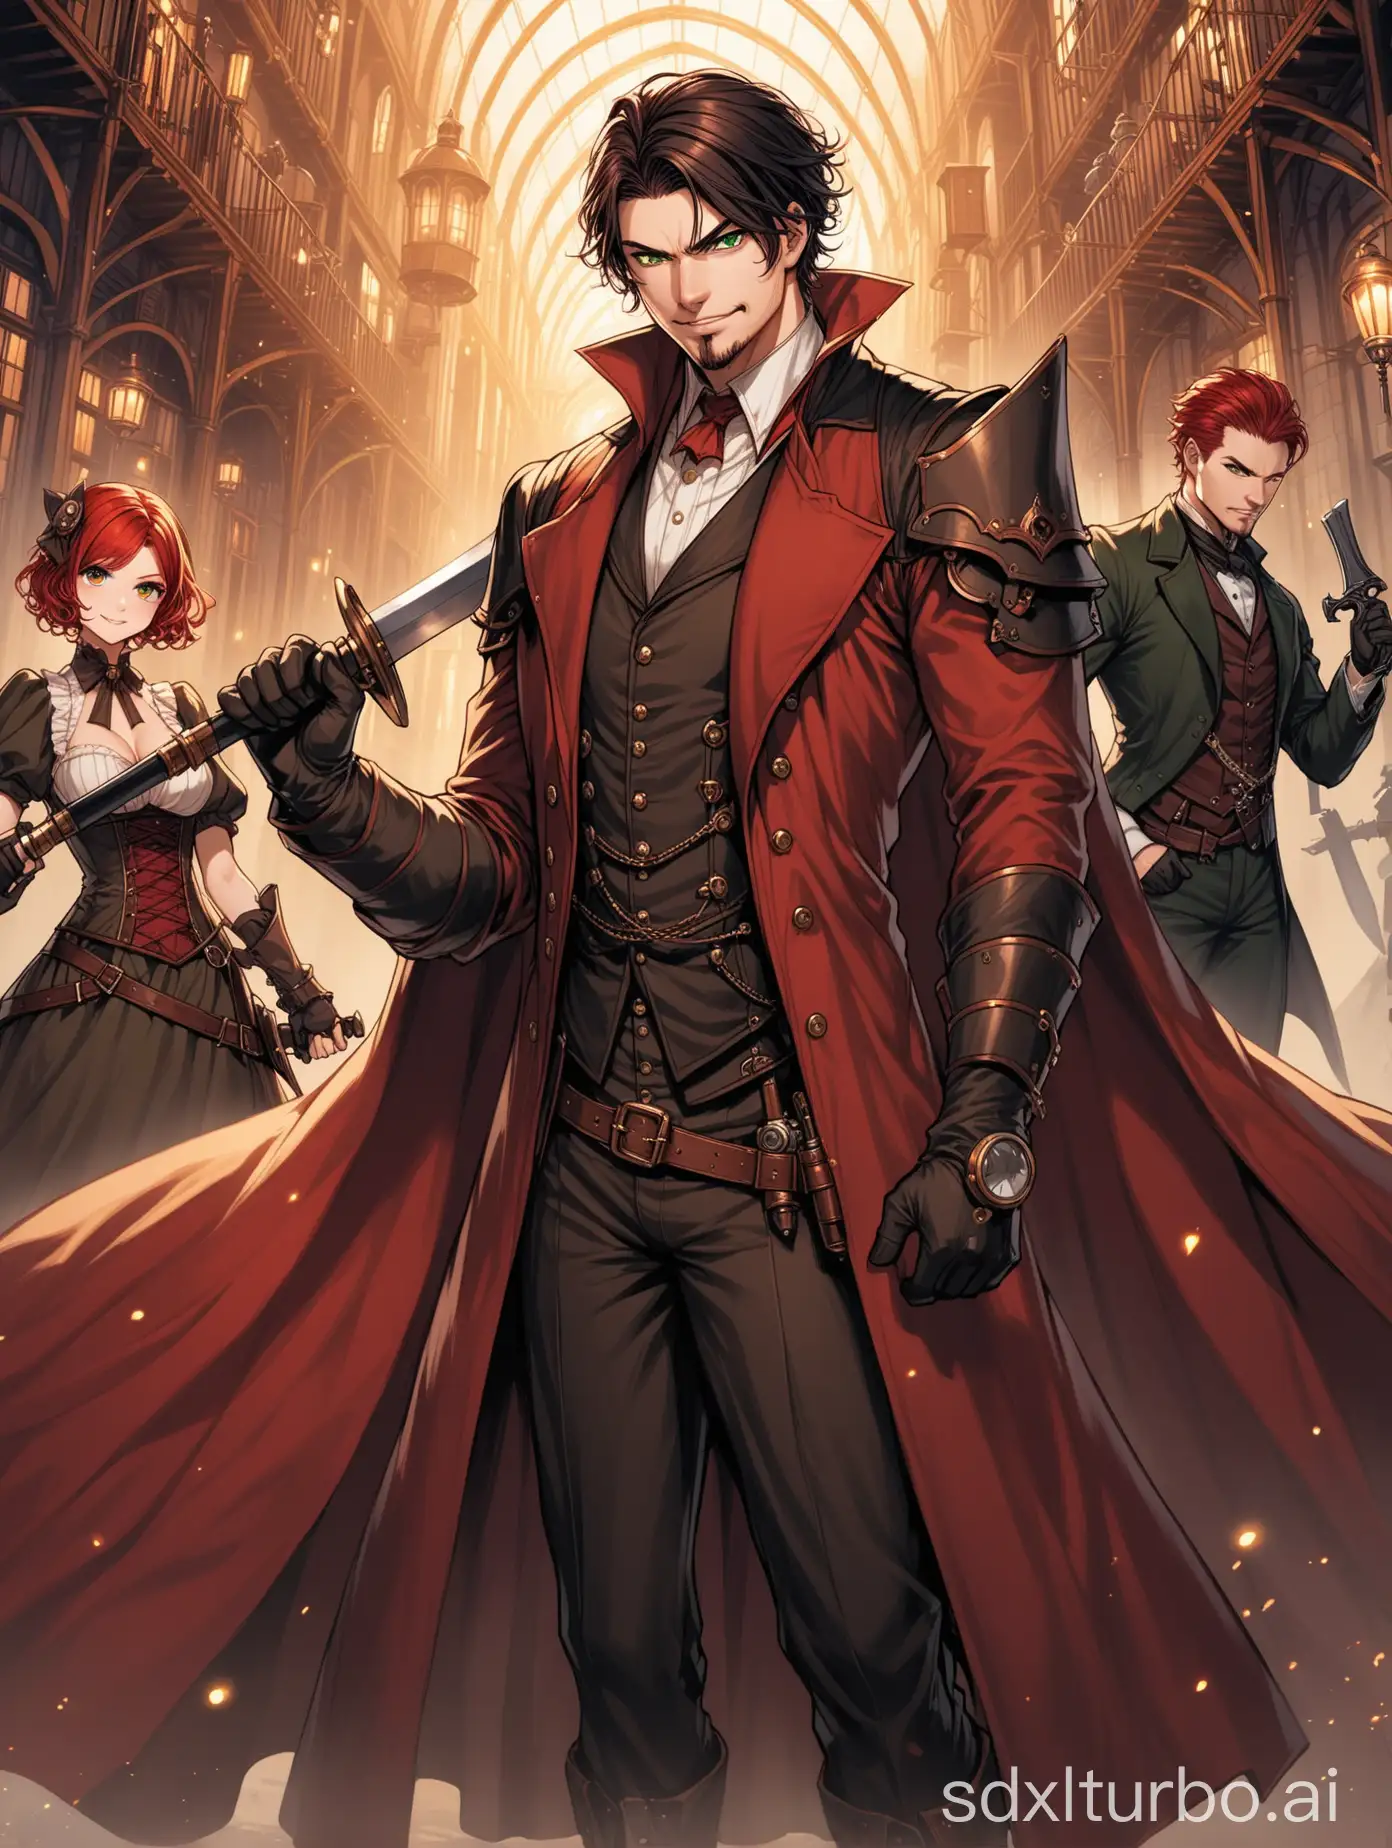 a handsome man, black short straight hair, red color eyes with scar, with dark circles, with intimidating expression, muscular body, with a beige suit, a extravagant executioner's cape, with a smiling psychopath redhead girl, with pixie curly short hair, green eyes, Victorian dress, with a executioner's cape, holding a rare weapon, blood, steampunk